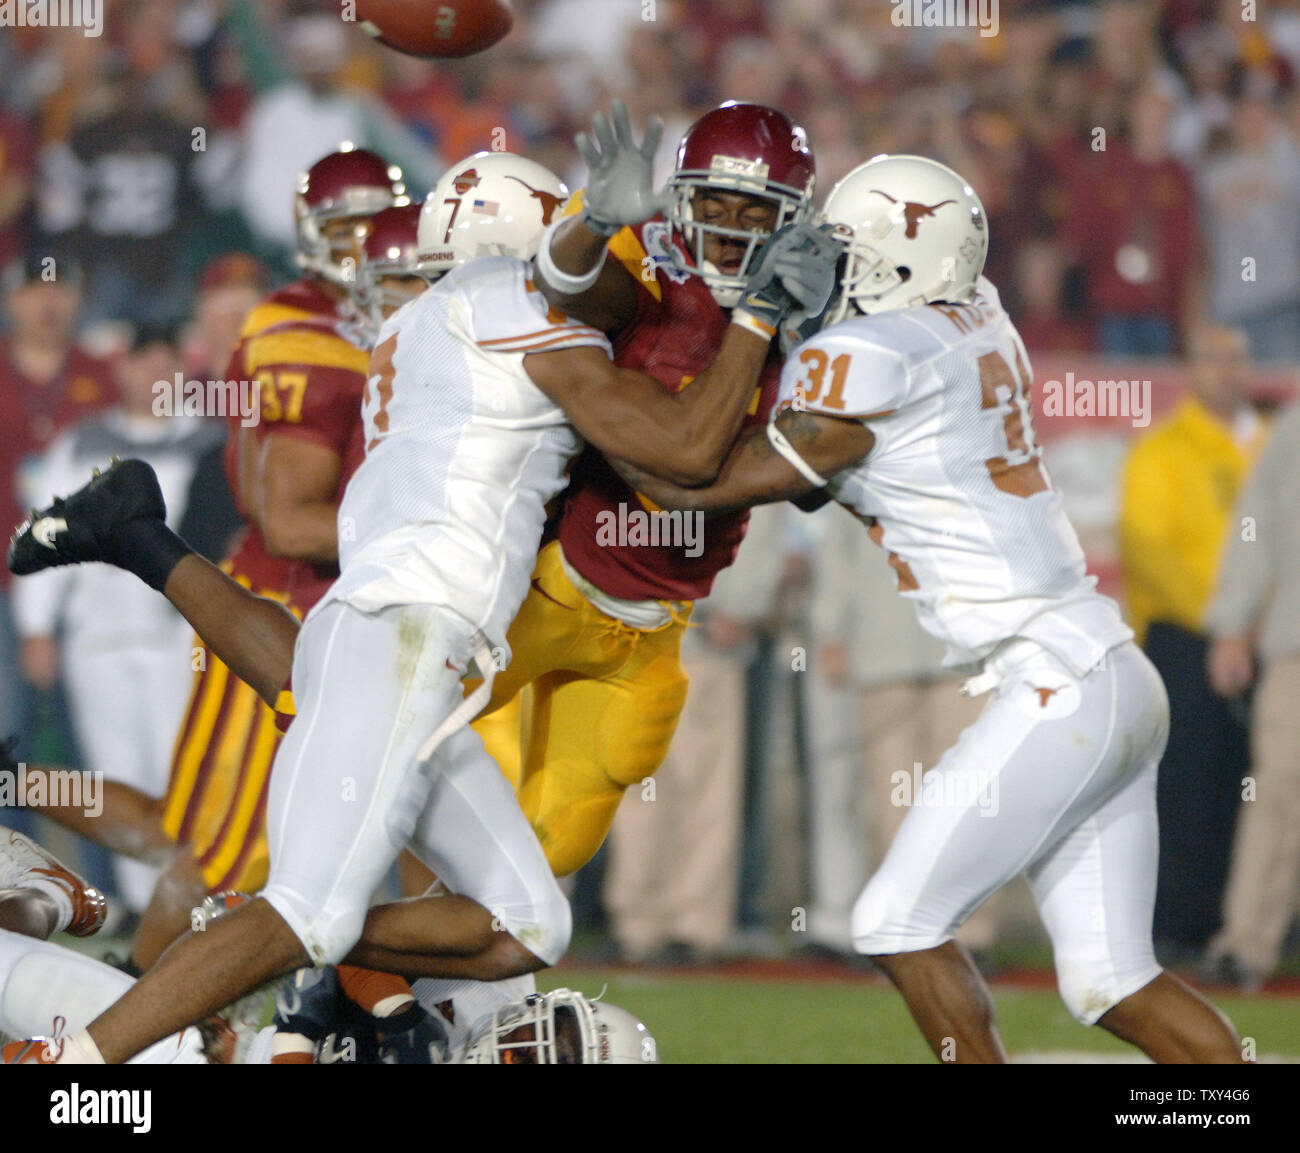 University of Southern California tailback Reggie Bush (#5) attempts to lateral the ball under pressure by University of Texas cornerbacks Michael Huff (#7) and Marcus Myers (#31) during second quarter action of the 92nd Rose Bowl Game in Pasadena, California on  January 4, 2004.  (UPI Photo/Phil McCarten) Stock Photo